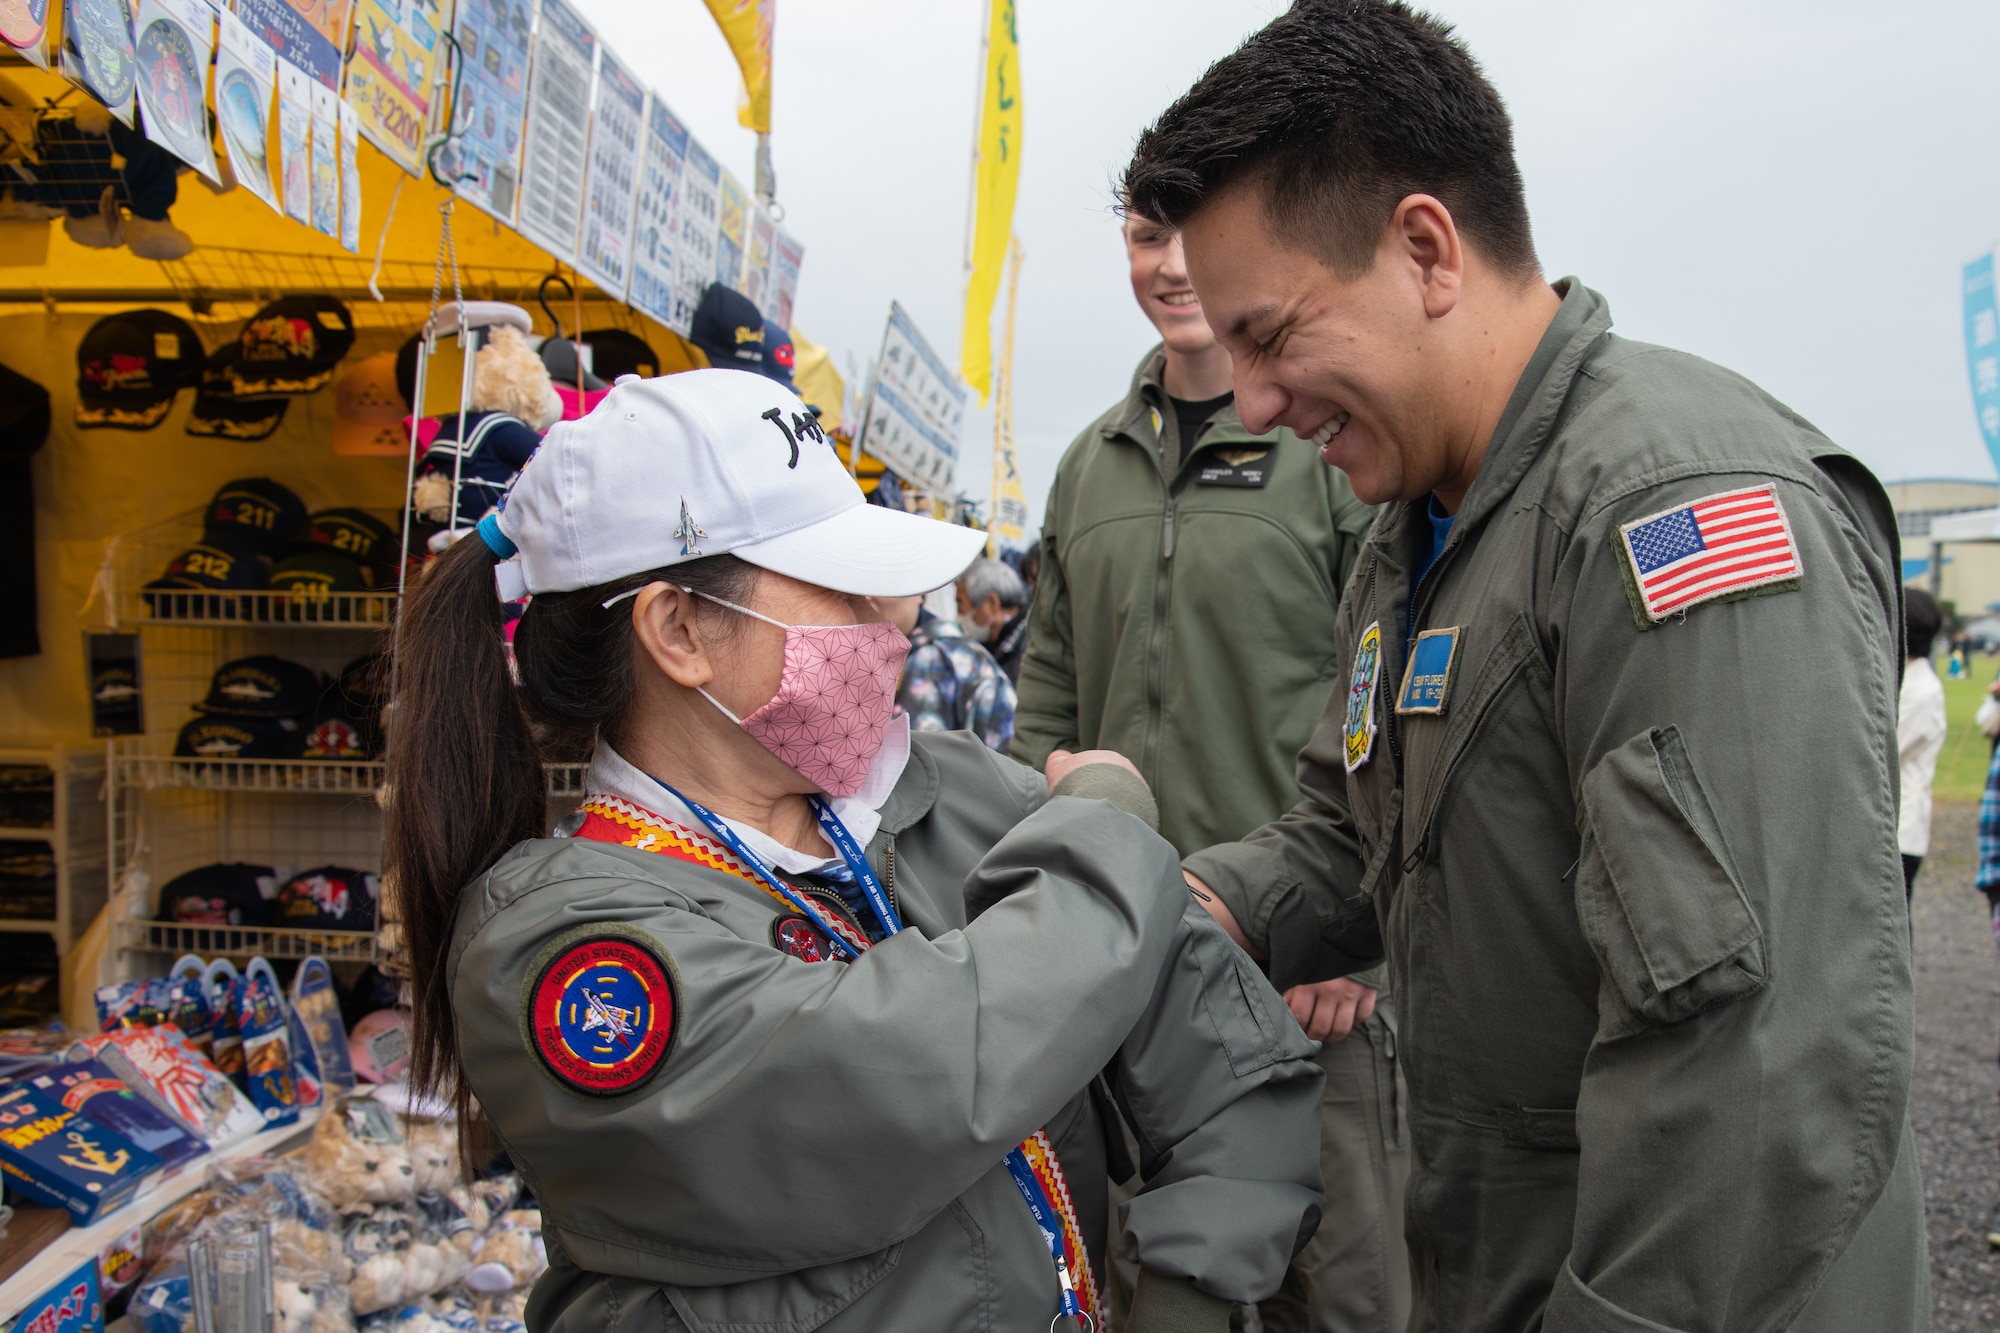 A member of the Japanese local community shows off a patch to a member of the 319th Expeditionary Reconnaissance Squadron at an Air Memorial event at Japan Maritime Self-Defense Force Kanoya Air Base, April 30, 2023. This was the first Air Memorial in Kanoya to include the 319th ERS. Japanese and U.S. service members expressed excitement about collaborating in this event and expressed appreciation for mutual exchanges of knowledge and experience. (U.S. Air Force photo by Senior Airman Brooklyn Golightly)